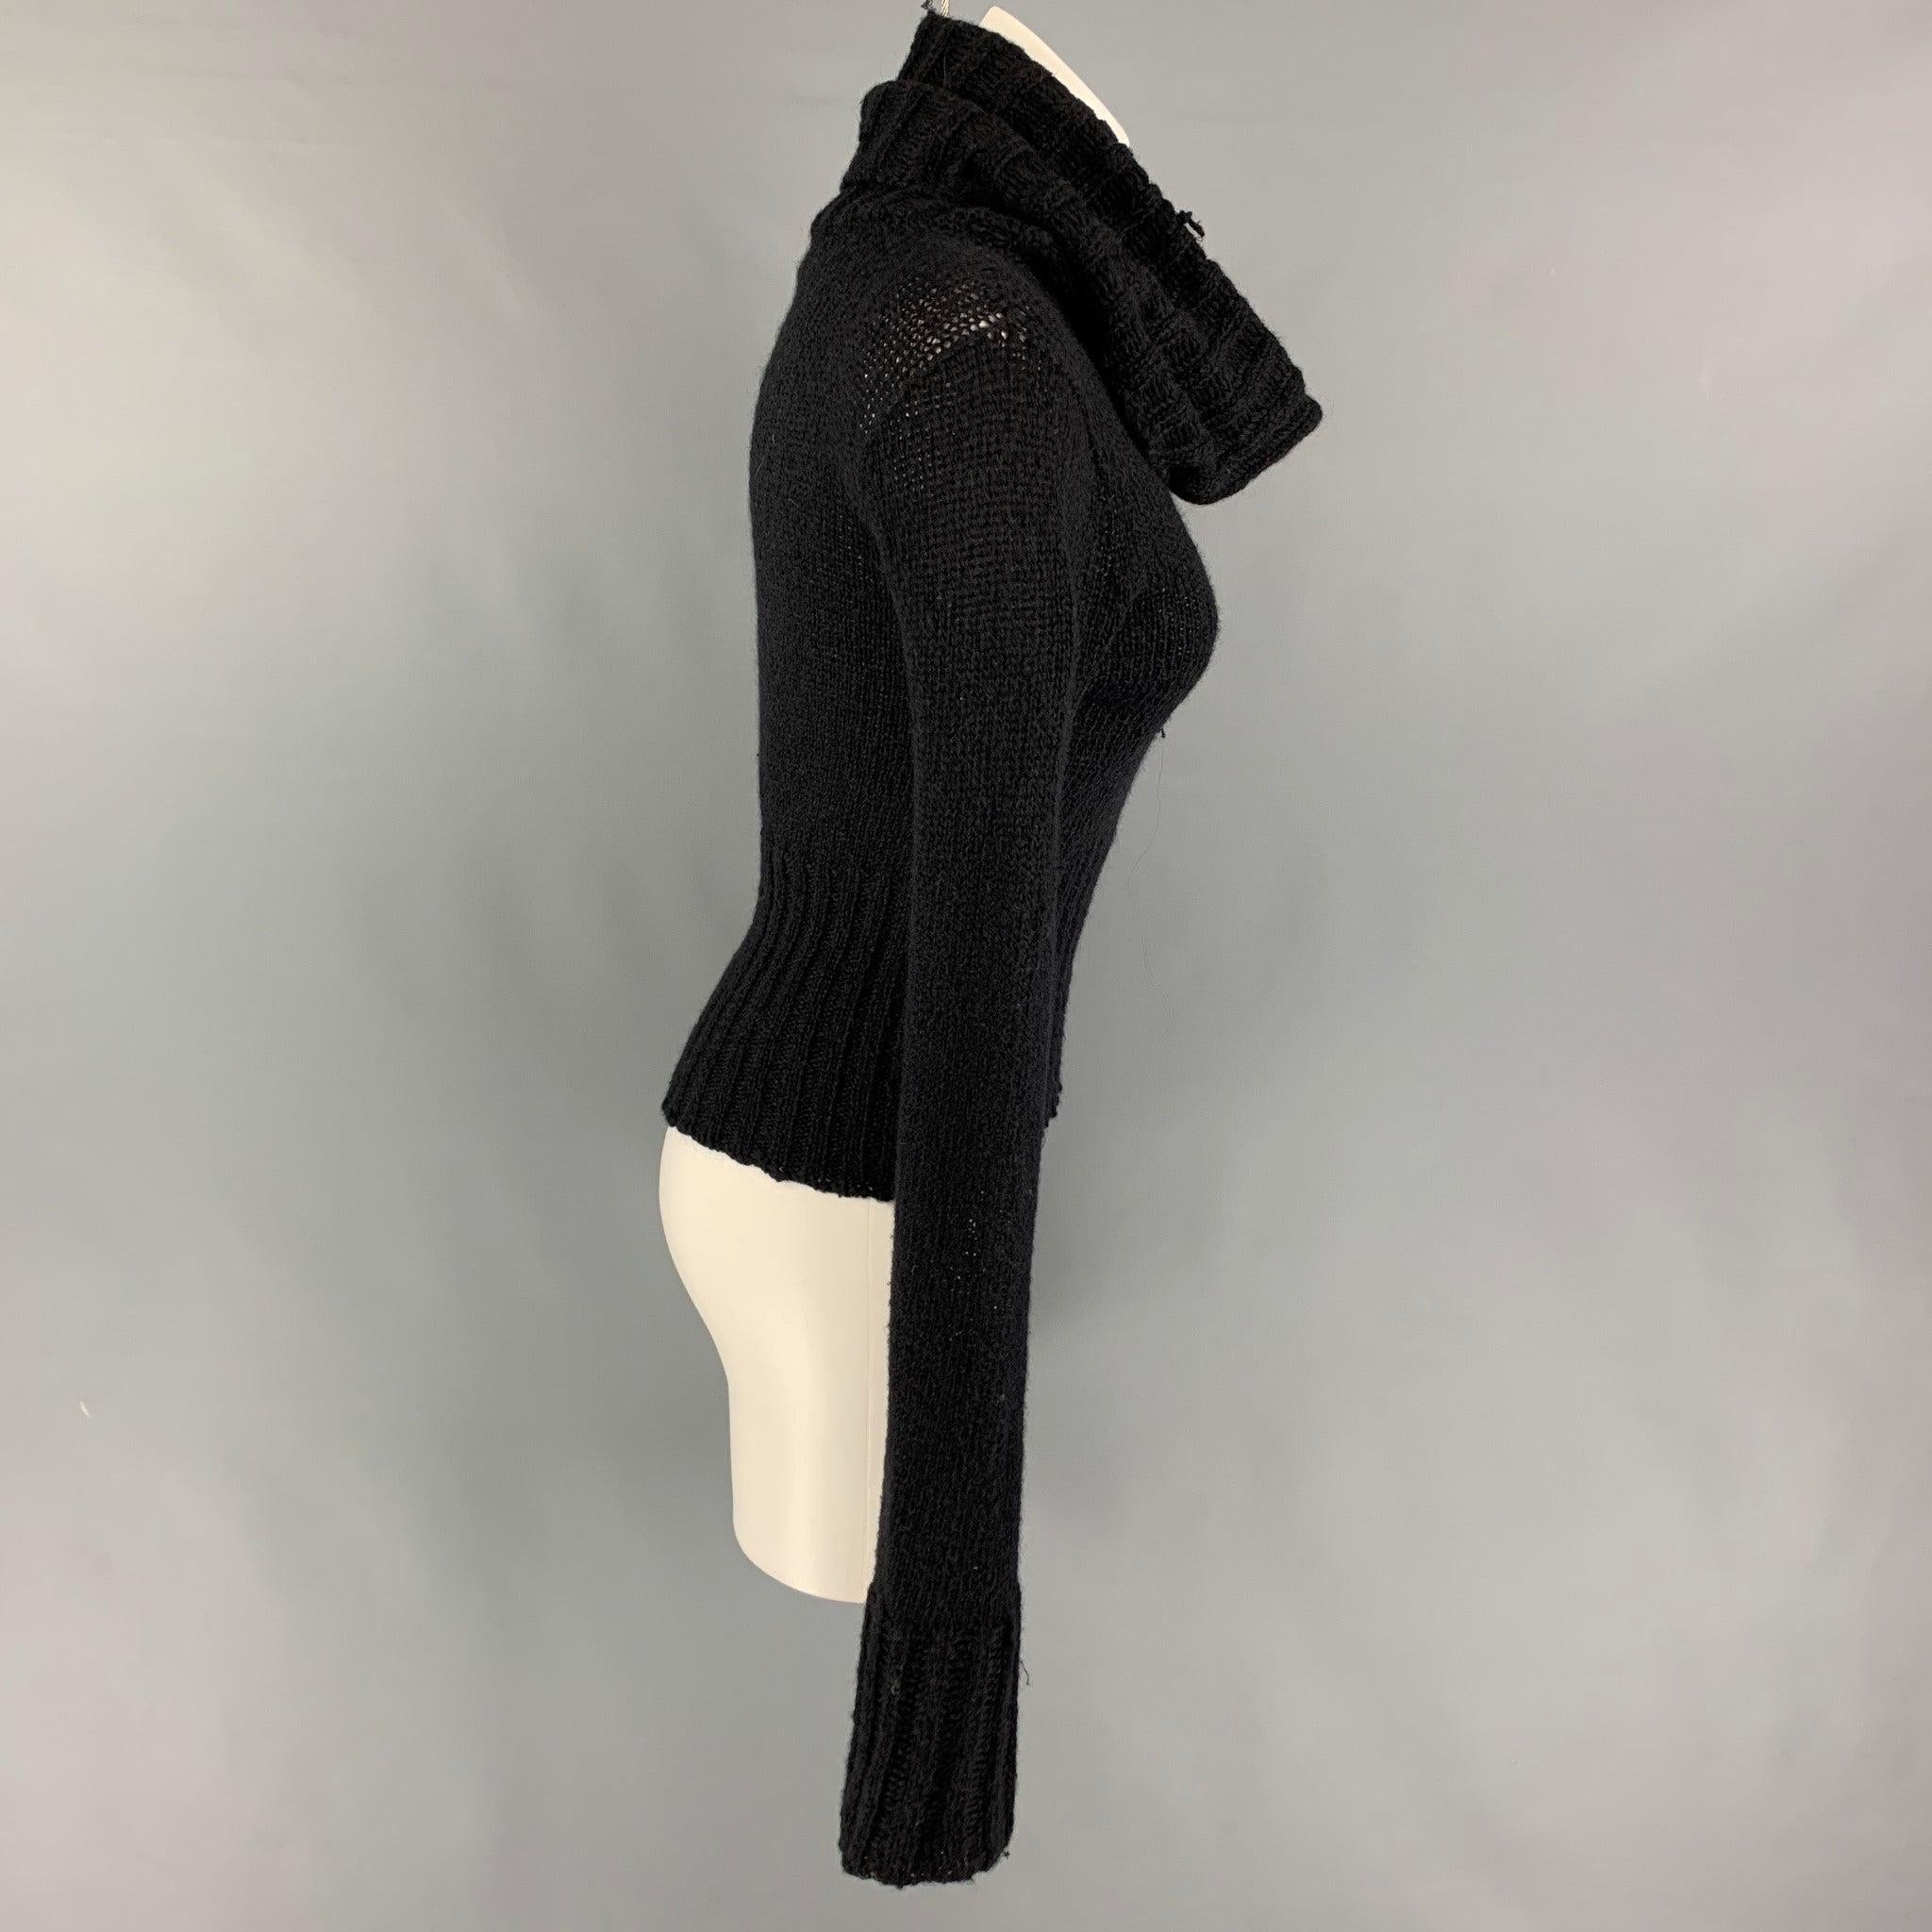 SPORTMAX sweater comes in a black nylon / mohair featuring long sleeves and a turtleneck.
Good
Pre-Owned Condition.
Mino wear.  

Marked:   M  

Measurements: 
 
Shoulder: 17 inches  Bust:
34 inches  Sleeve: 34 inches  Length: 19.5 inches 
  
  
